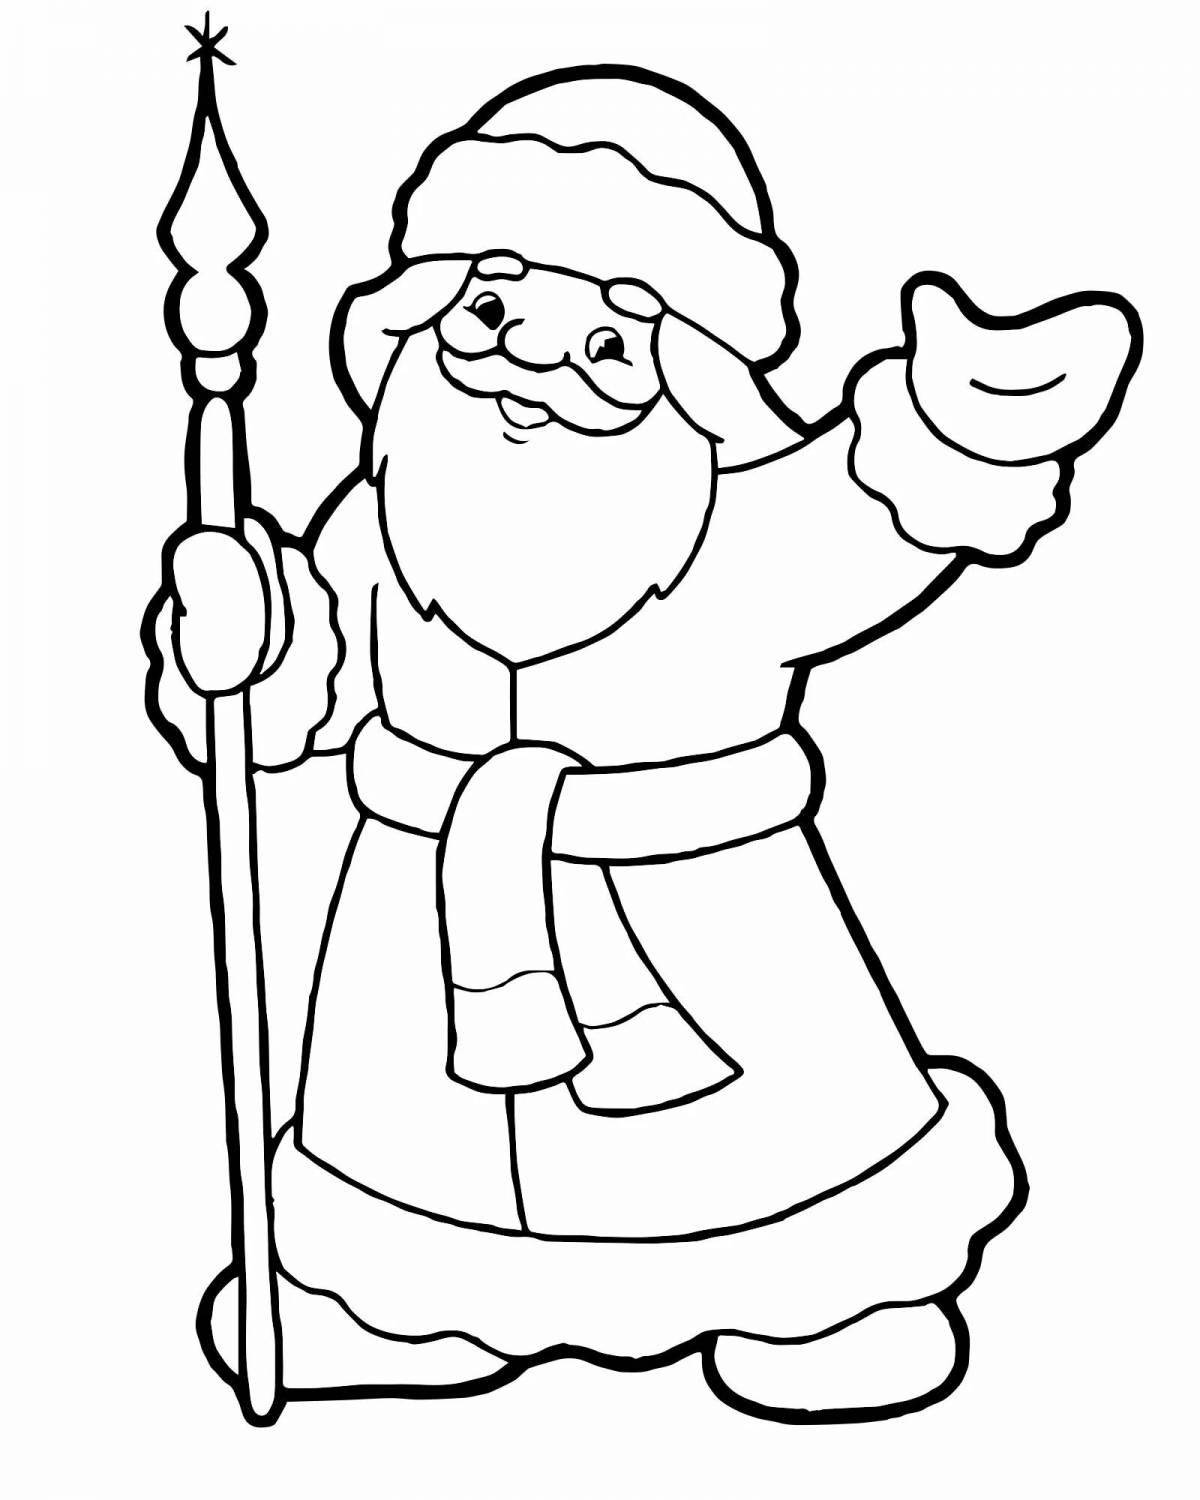 Colorful Santa Claus coloring book for children 2-3 years old